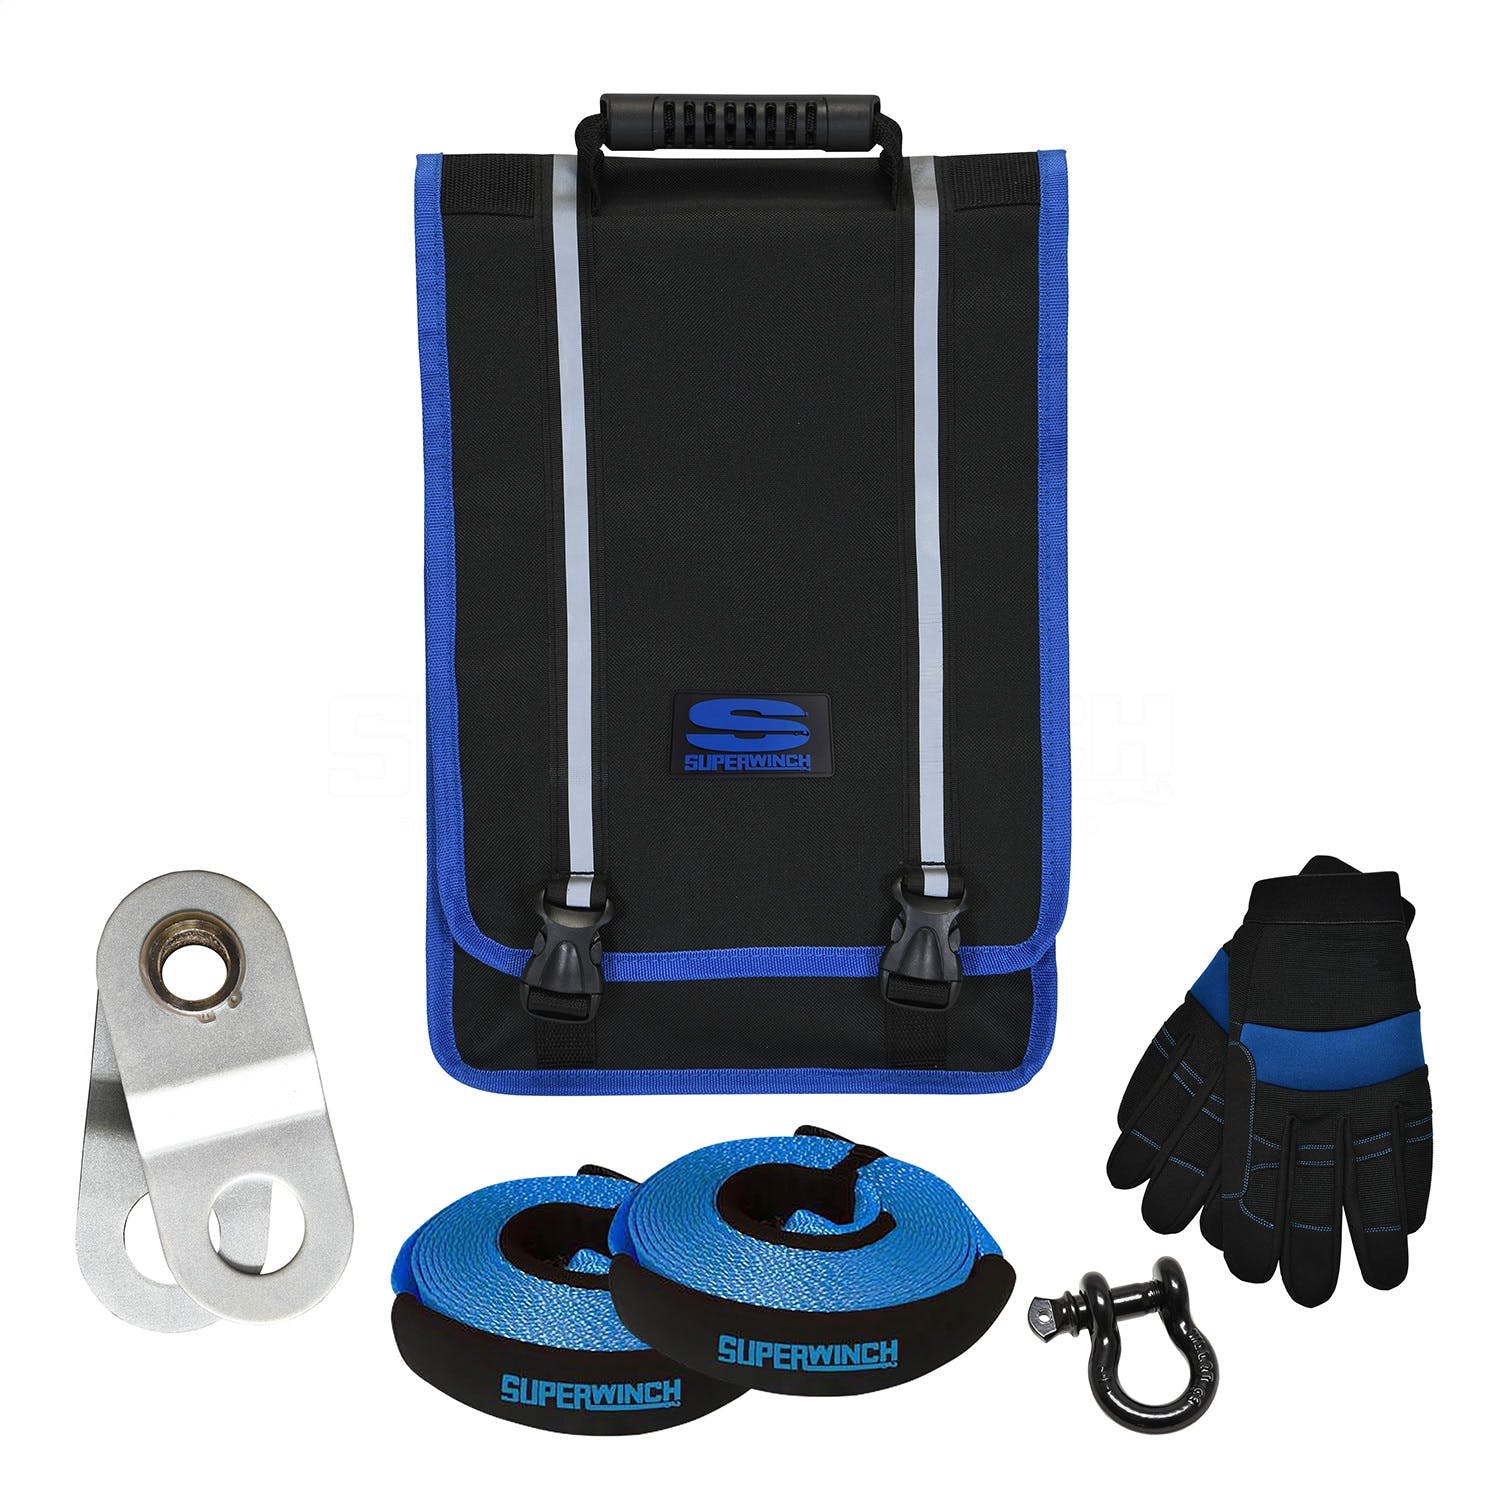 Superwinch 2577 Recovery Kit